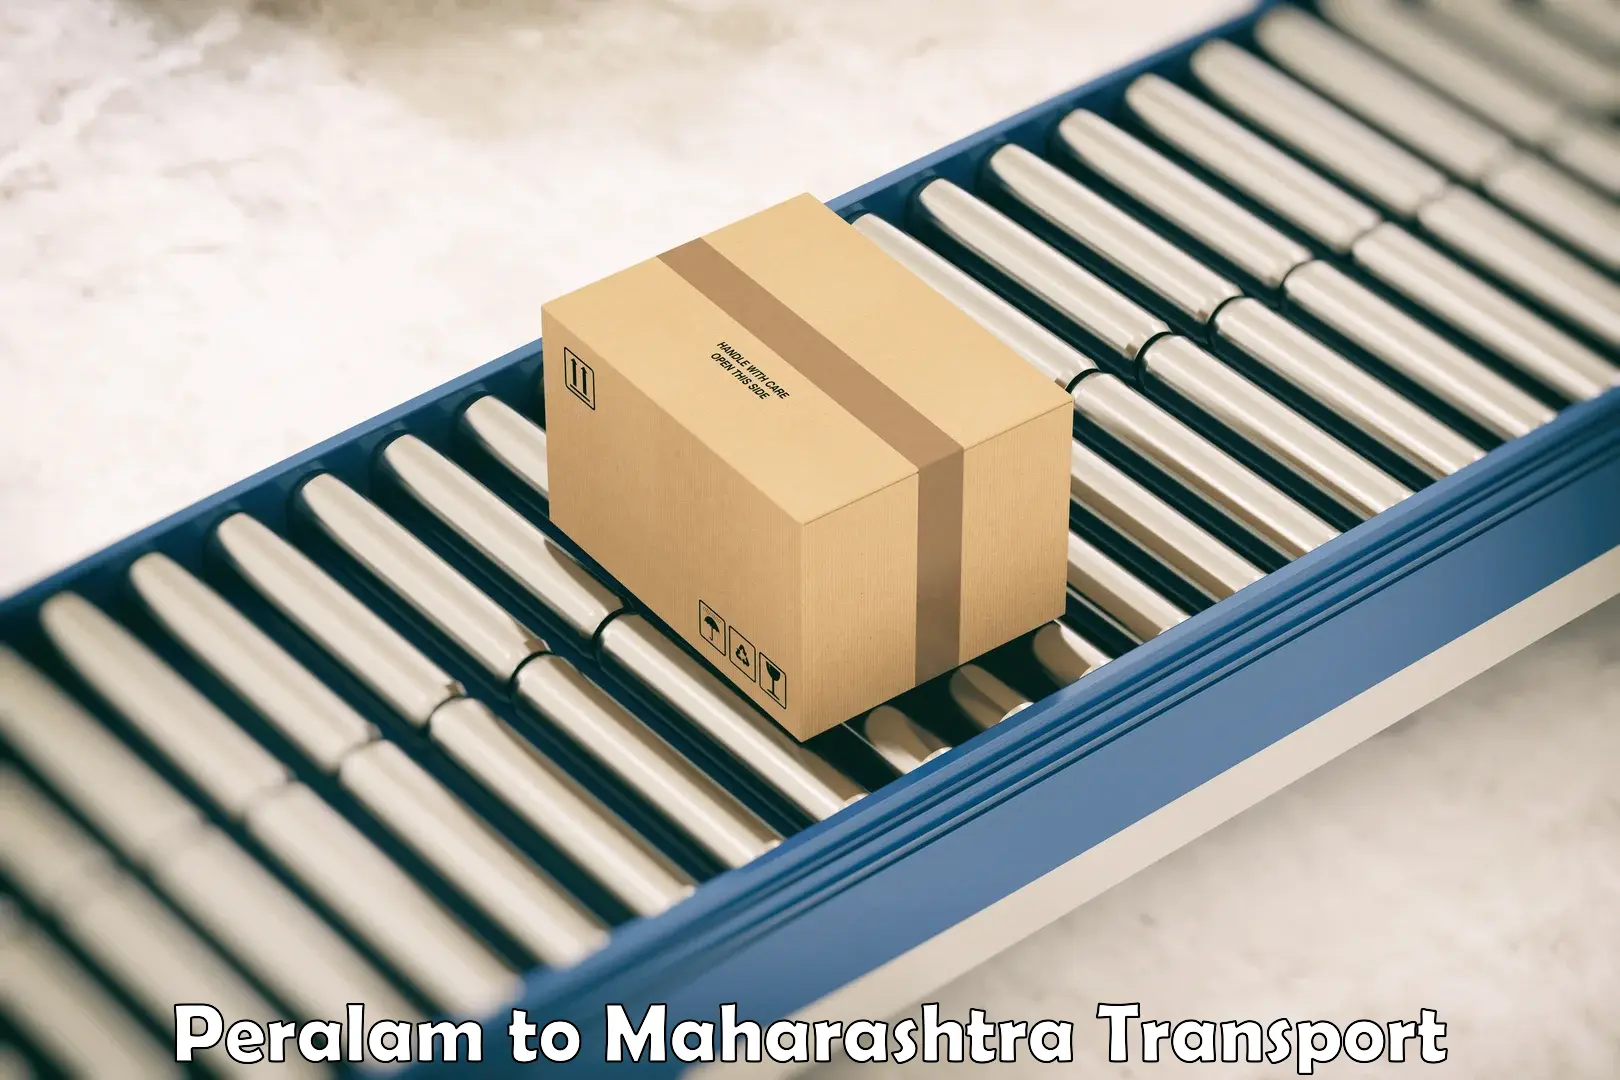 Air freight transport services Peralam to Mahabaleshwar